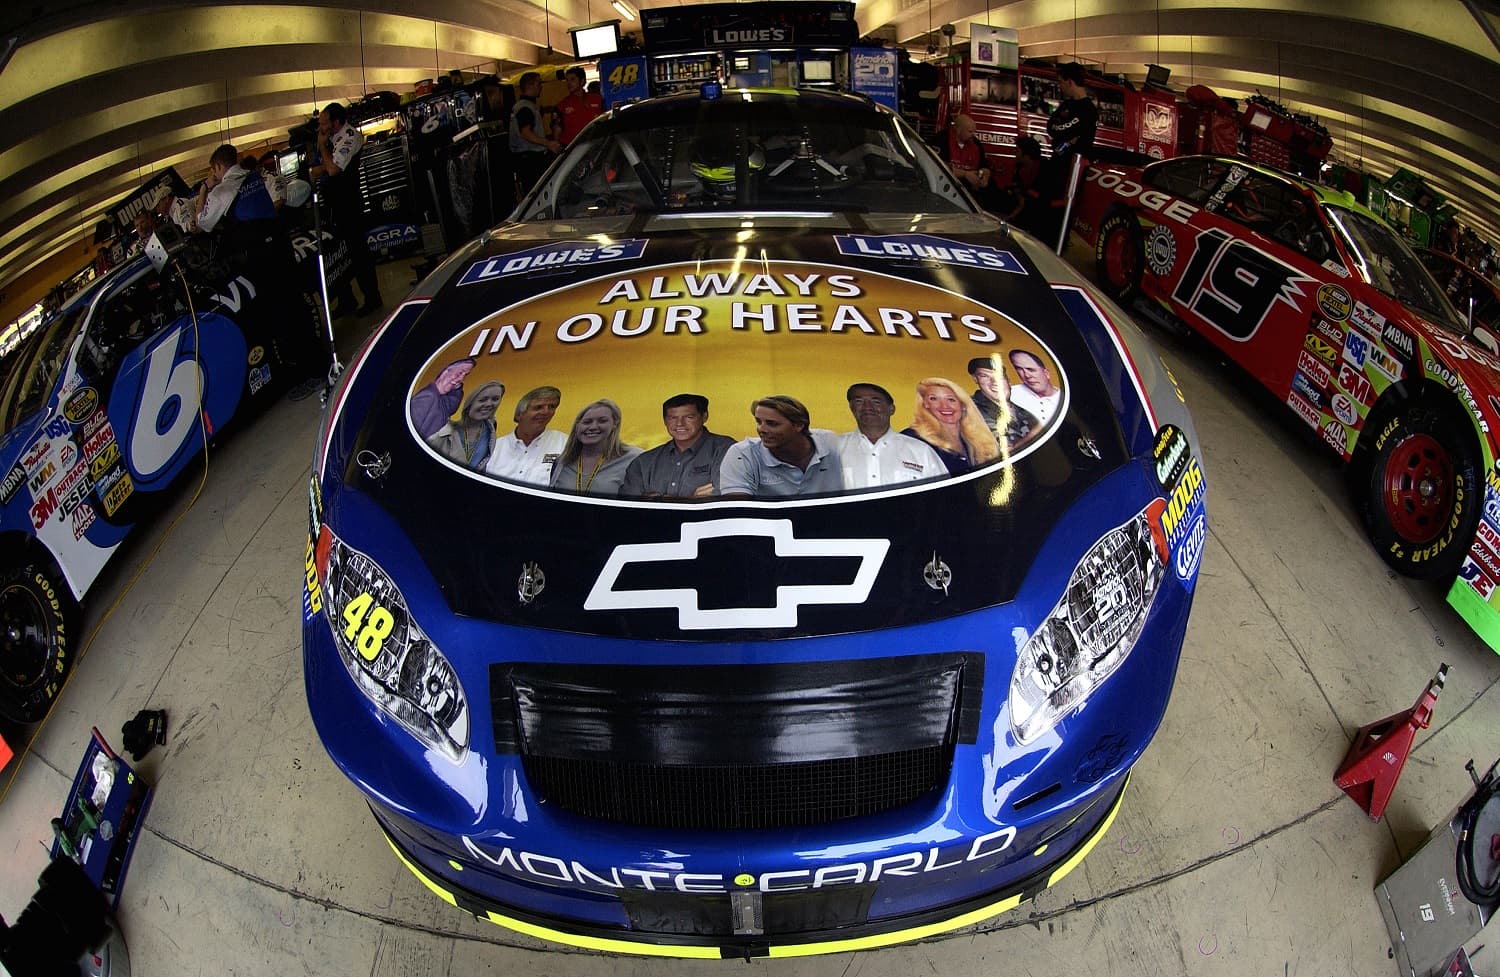 The tribute carried on the hood of the No. 48 Hendrick Motorsports Lowes Chevrolet driven by Jimmie Johnson, during practice for the NASCAR Nextel Cup Series Bass Pro Shops MBNA 500 on Oct. 30, 2004 at Atlanta Motor Speedway.